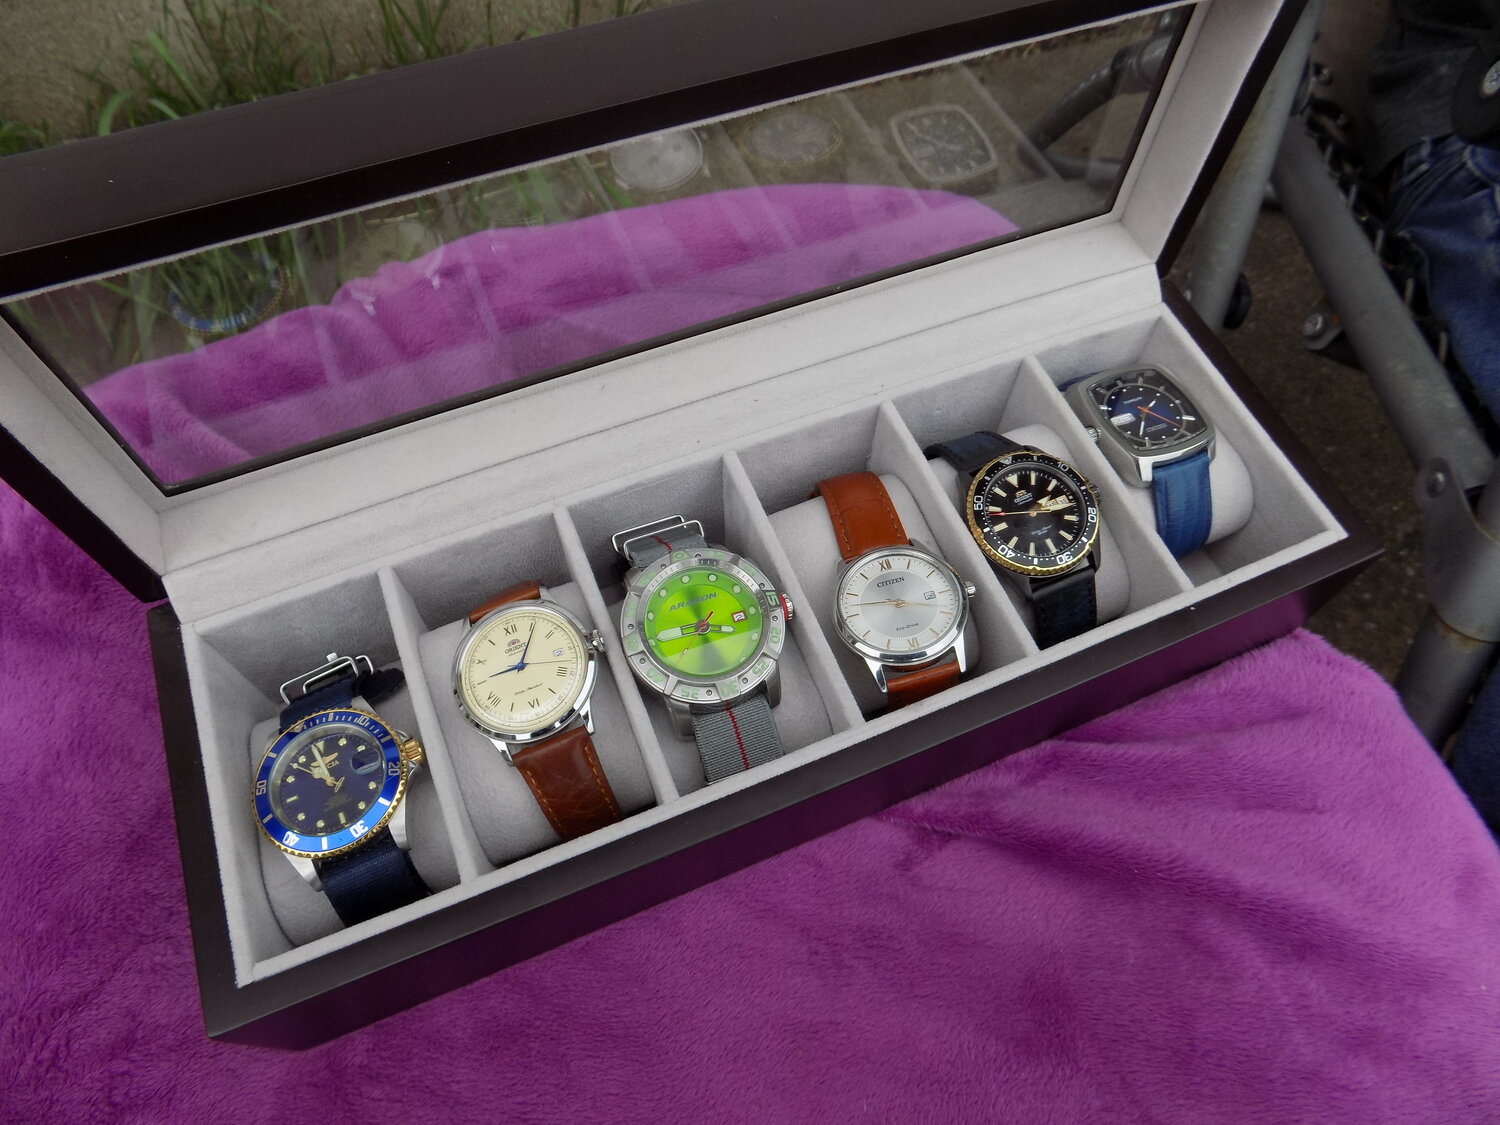 When purchasing a new watch, aesthetics are top priority for Mayeno.  Here, a few of his favorites in a display box gifted him by his sister (L-R): Invicta ProDiver Automatic, Orient Bambino III, Aragon Gauge 3G, Citizen Eco-Drive AW1236, Orient Kamasu Diver, and Seiko Recraft.